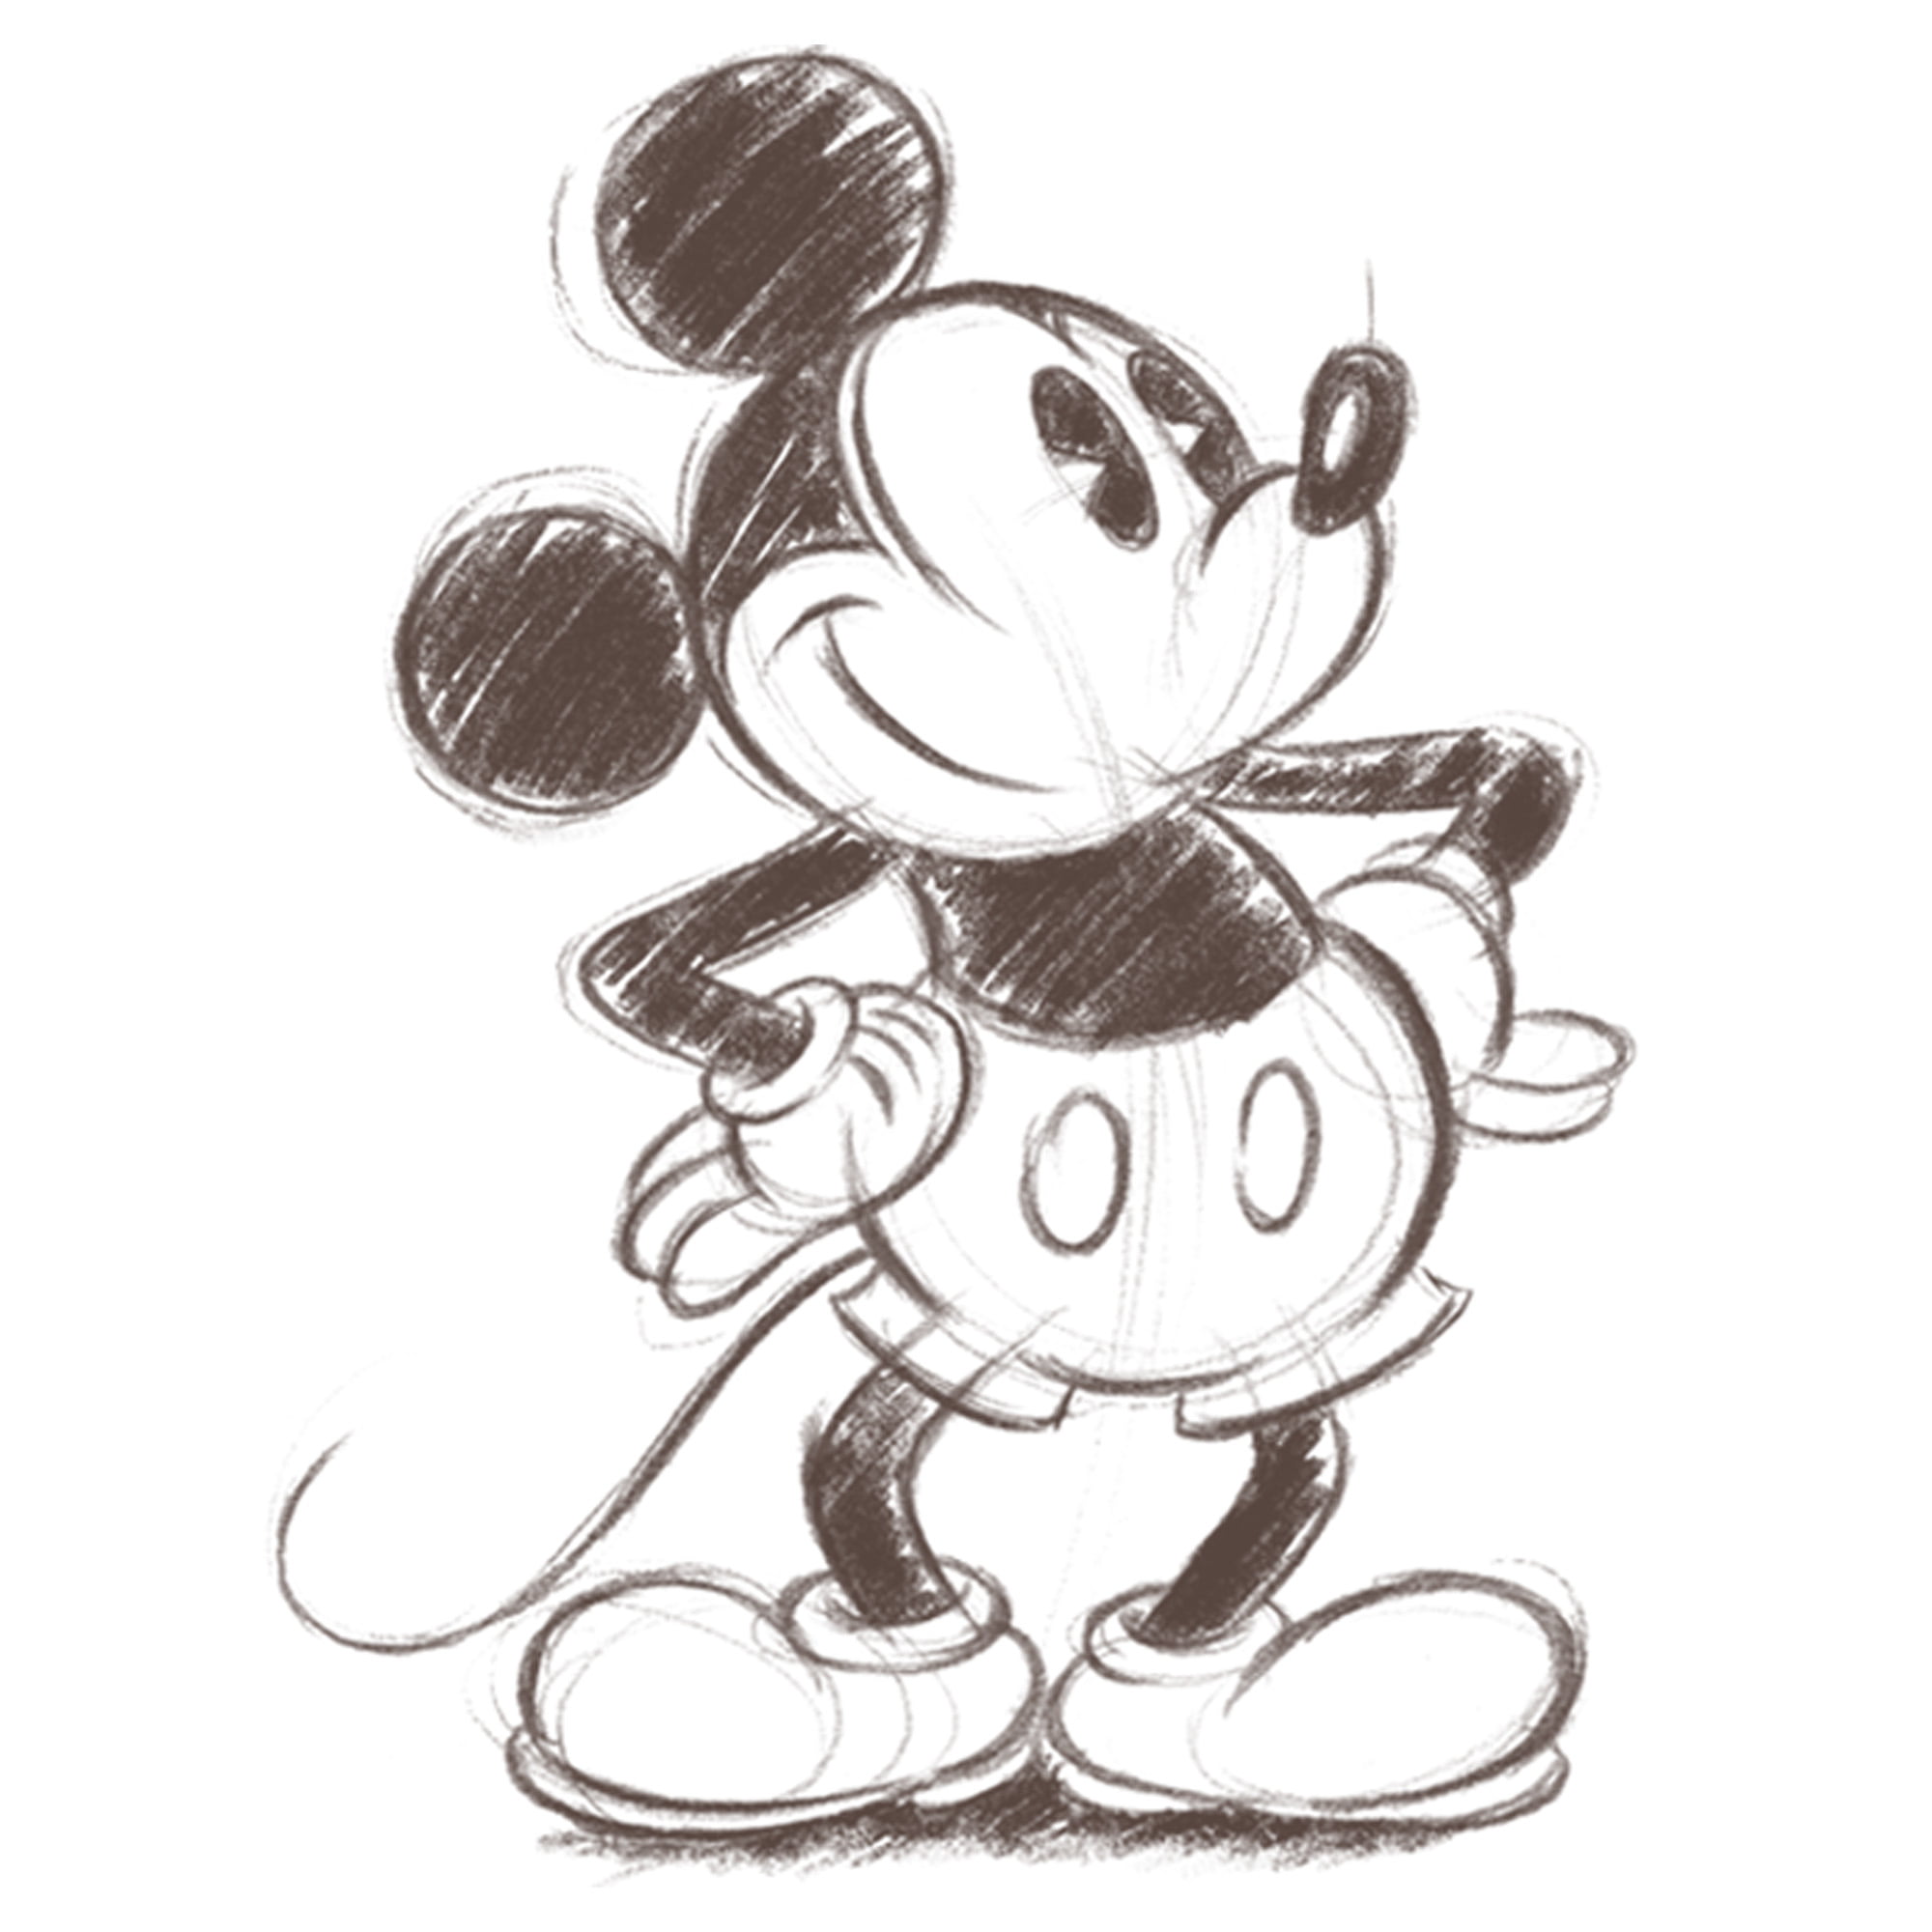 Drawing Mickey Mouse : r/cute